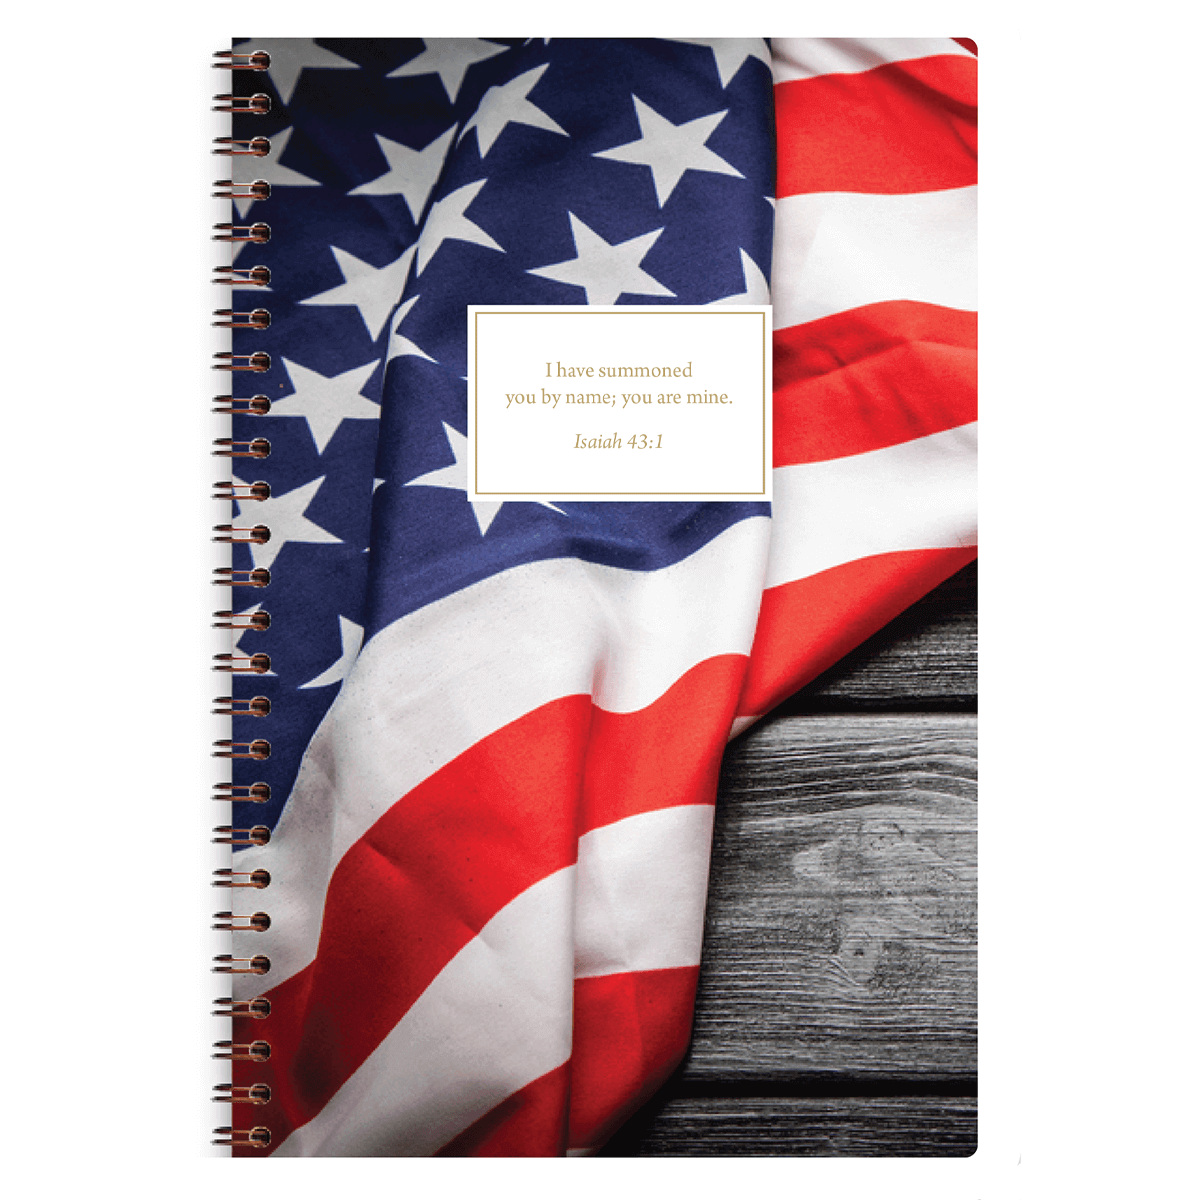 freedom bible journal, american flag journal, freedom scripture journal, christian journal, christian gifts, christian gifts for mothers day, christian gifts for wedding, christian gifts for graduation, unique christian gift, personalized christian gift, wire coil journal